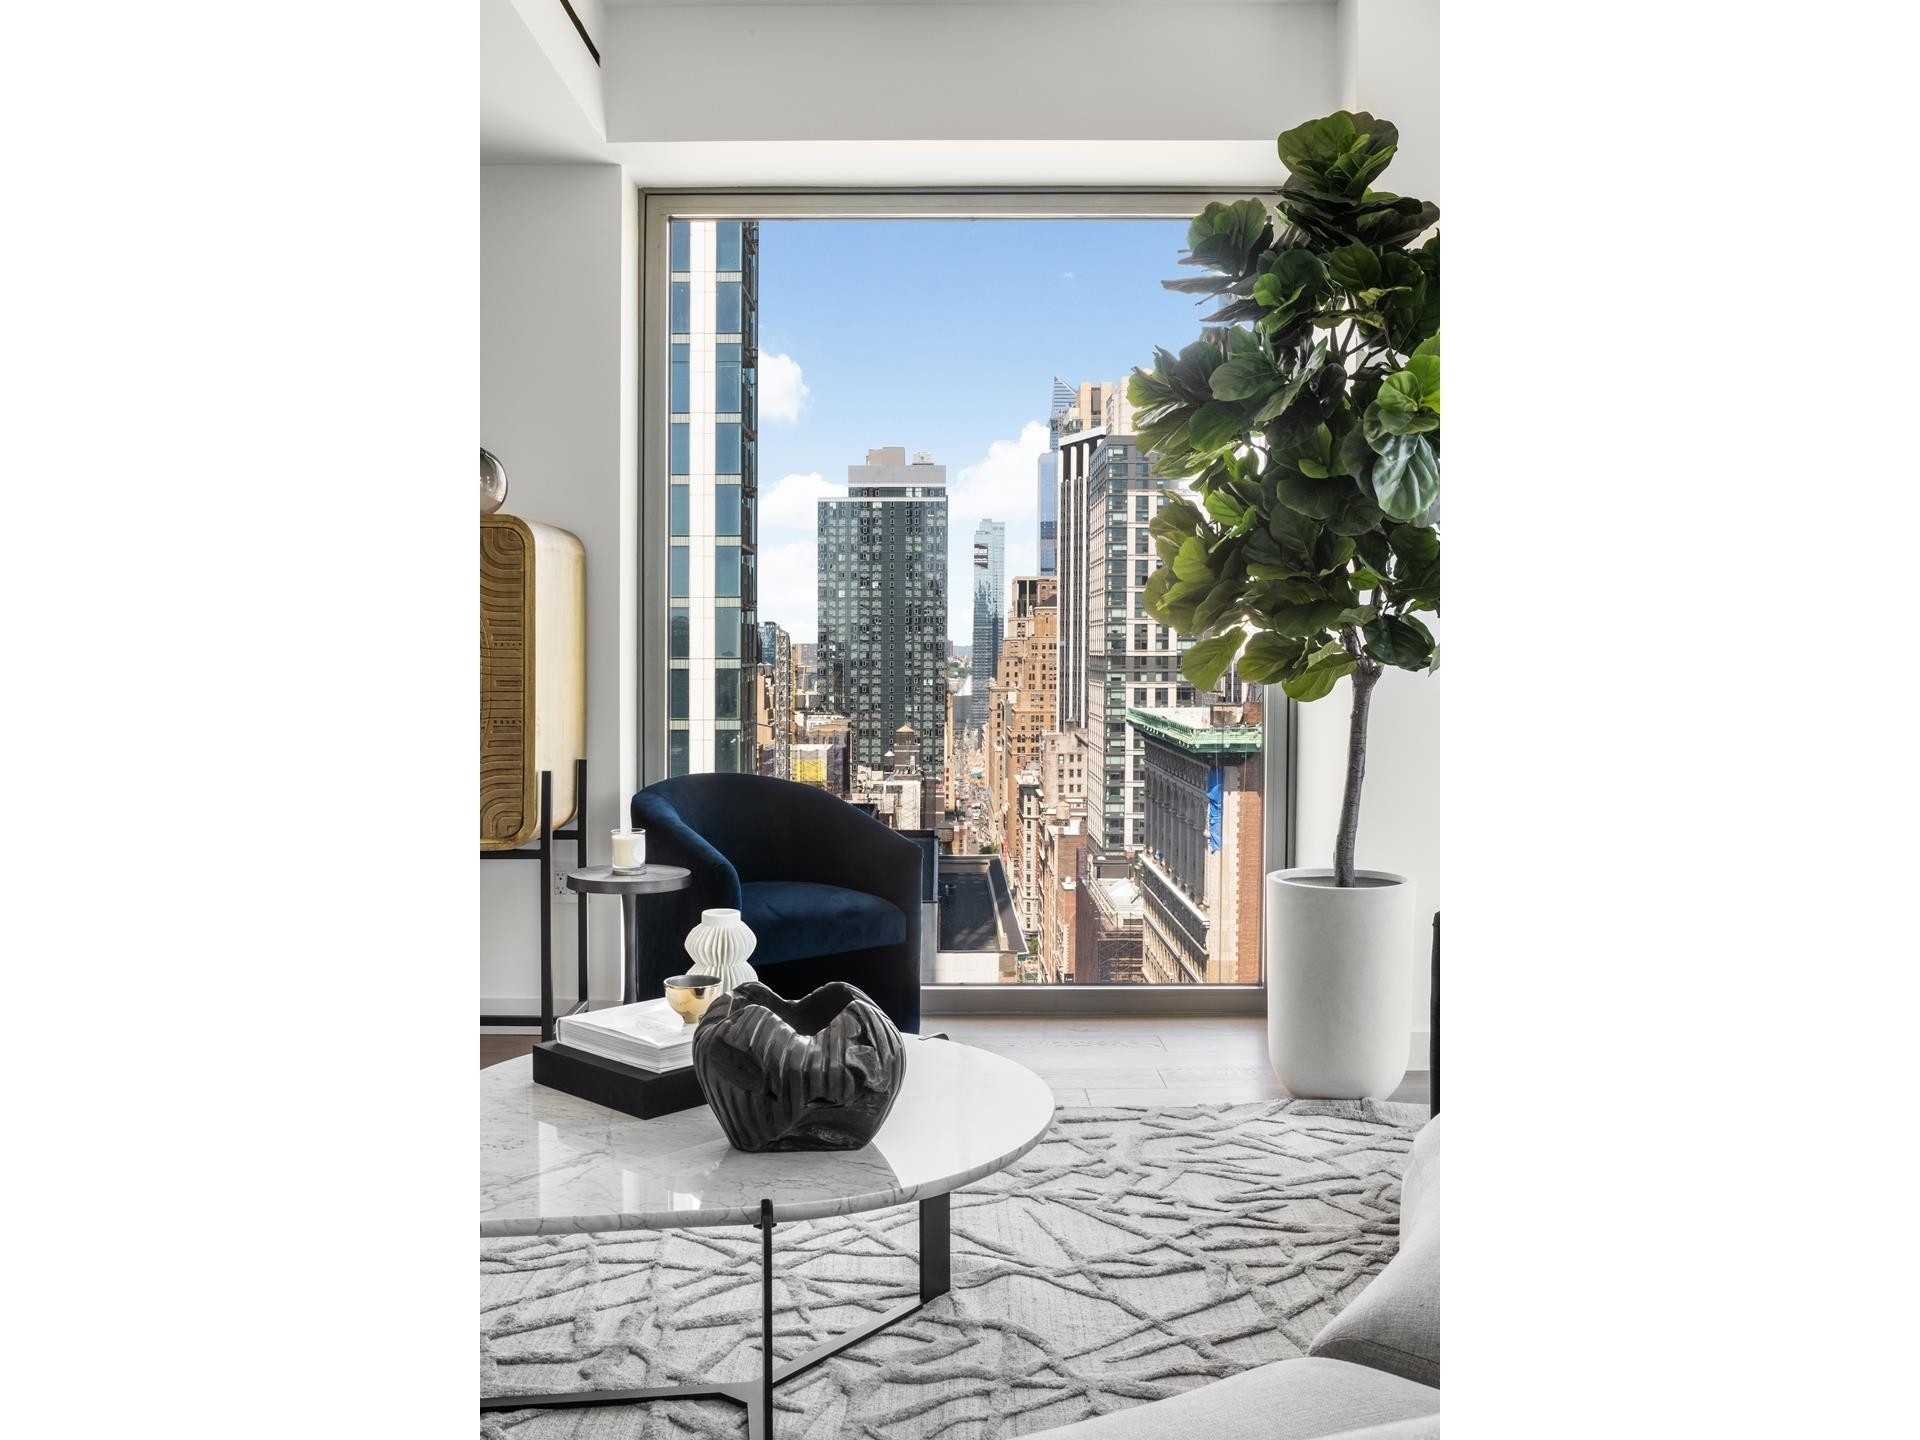 Condominium for Sale at 30 E 31ST ST, 19 NoMad, New York, New York 10016